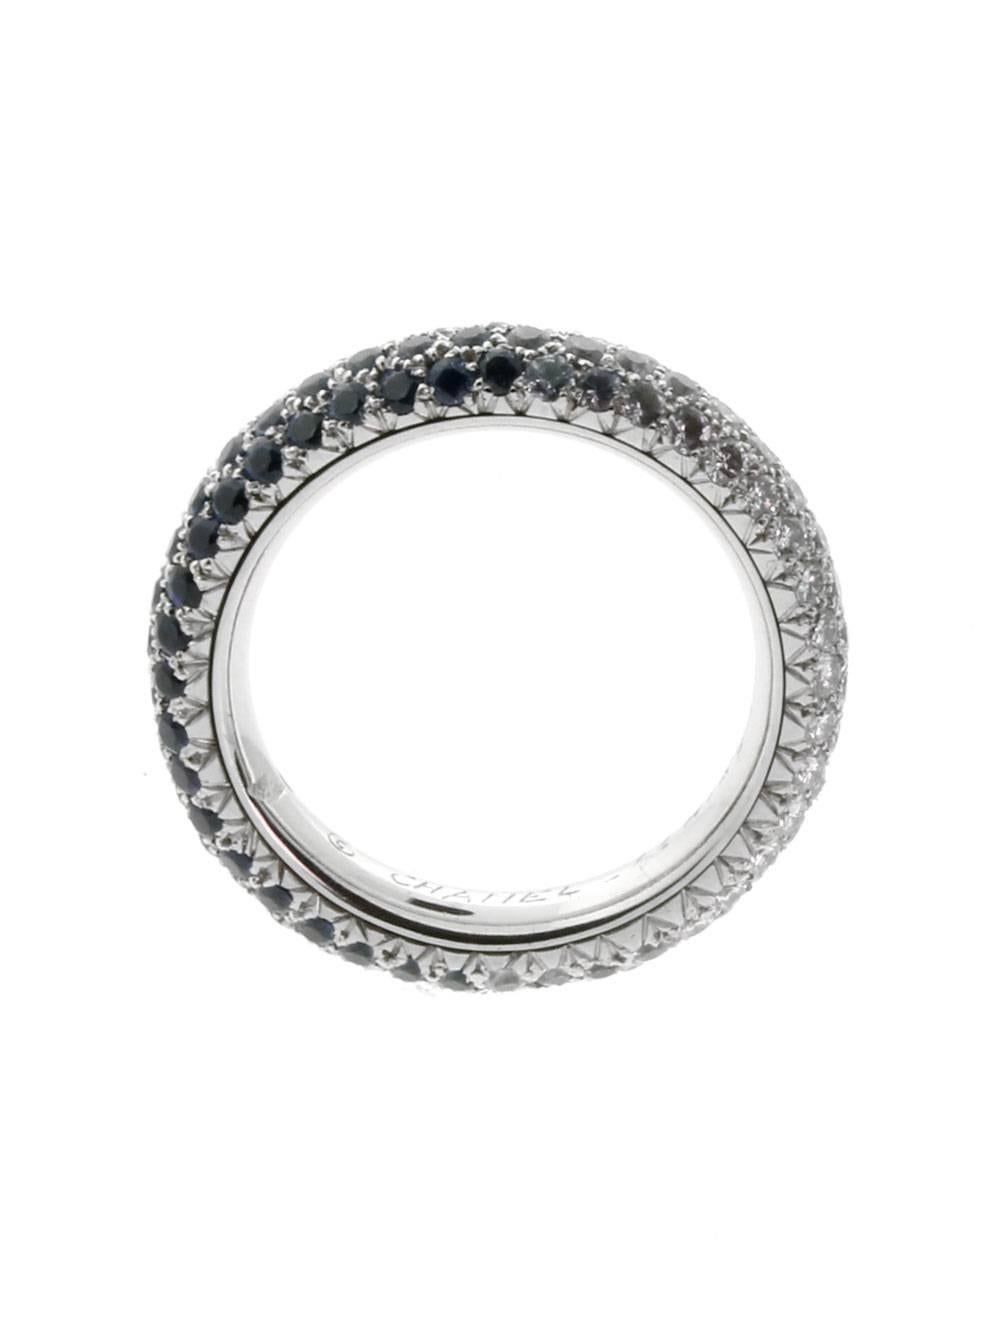 A magnificent authentic Chanel eternity ring set with the finest Chanel round brilliant cut diamonds, and sapphires in 18k white gold.

Size: EU 55 / US 6
Dimensions: 4mm Wide (.15″ Inches)

Inventory ID: 0000038